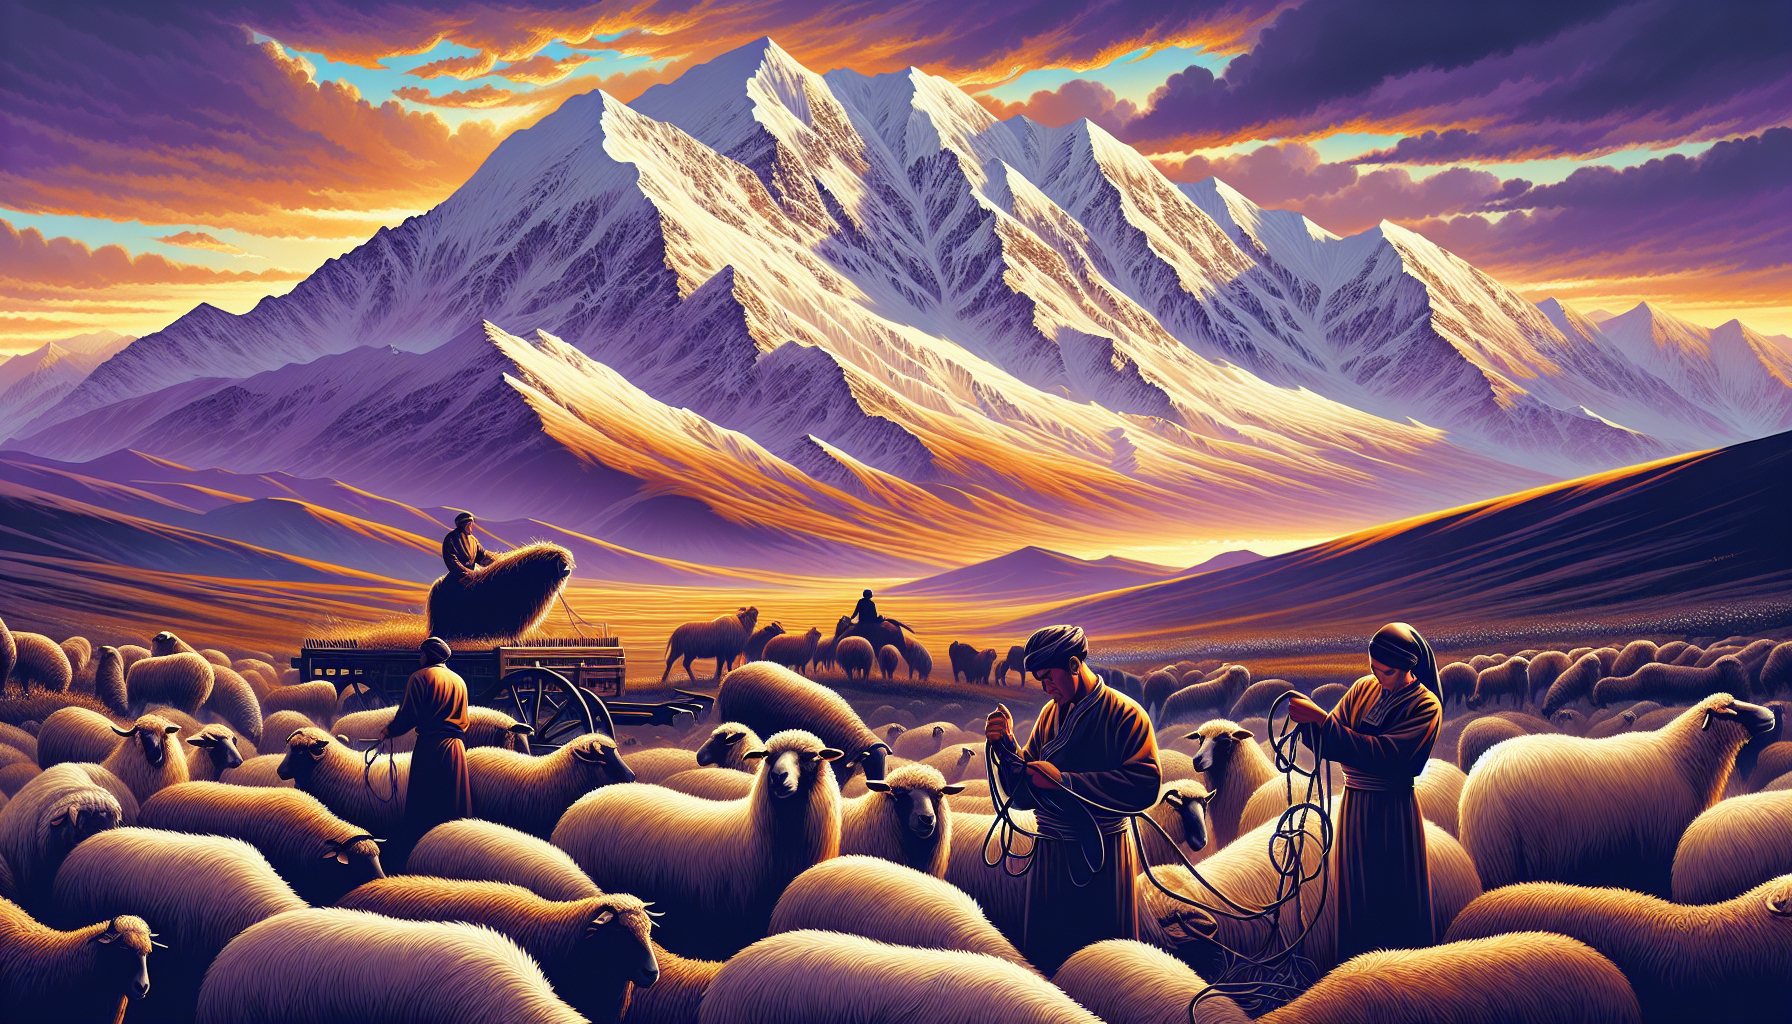 Illustration of nomadic traditions in Central Mongolia